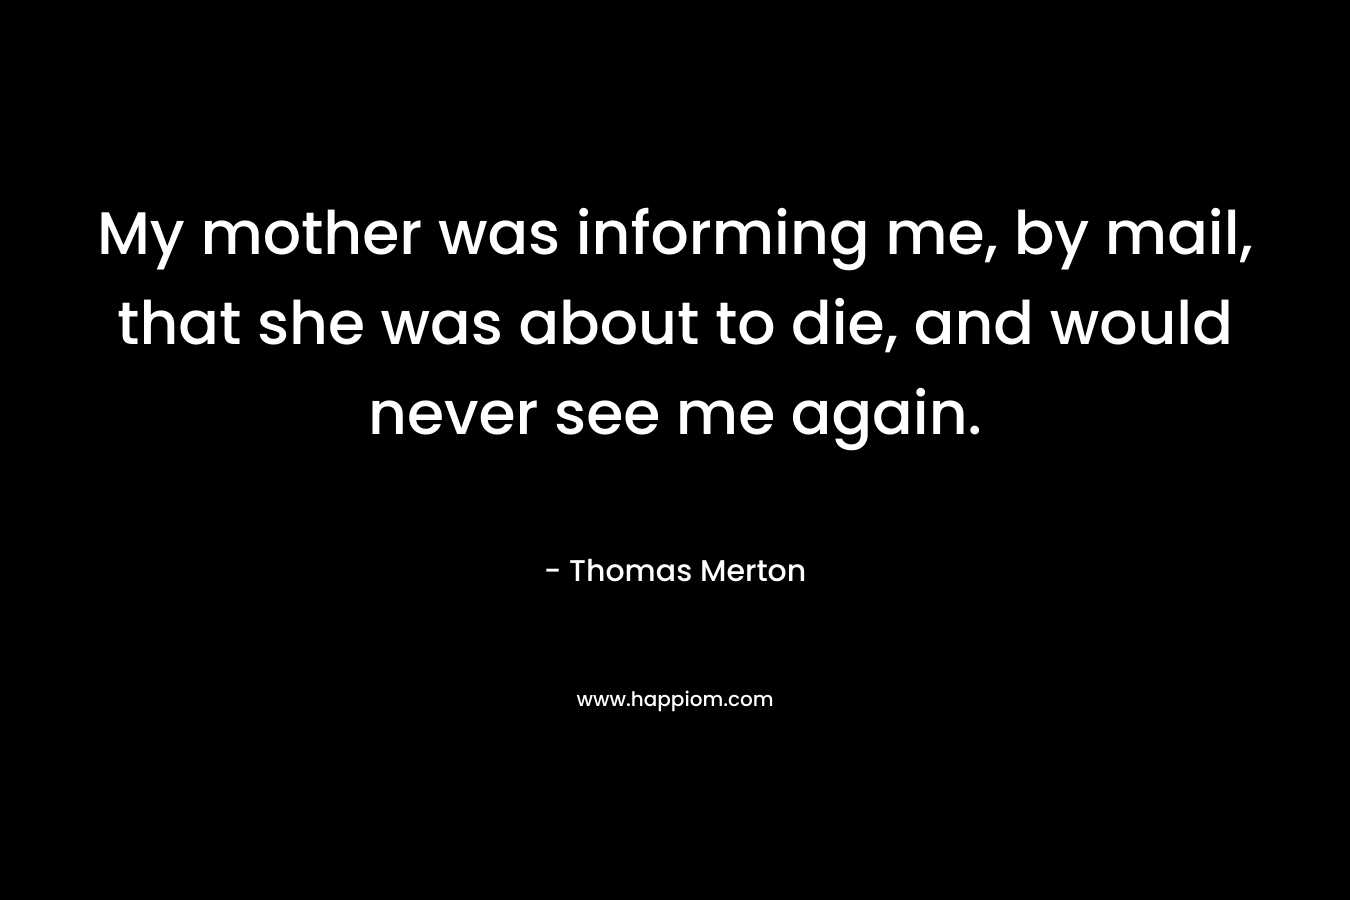 My mother was informing me, by mail, that she was about to die, and would never see me again. – Thomas Merton